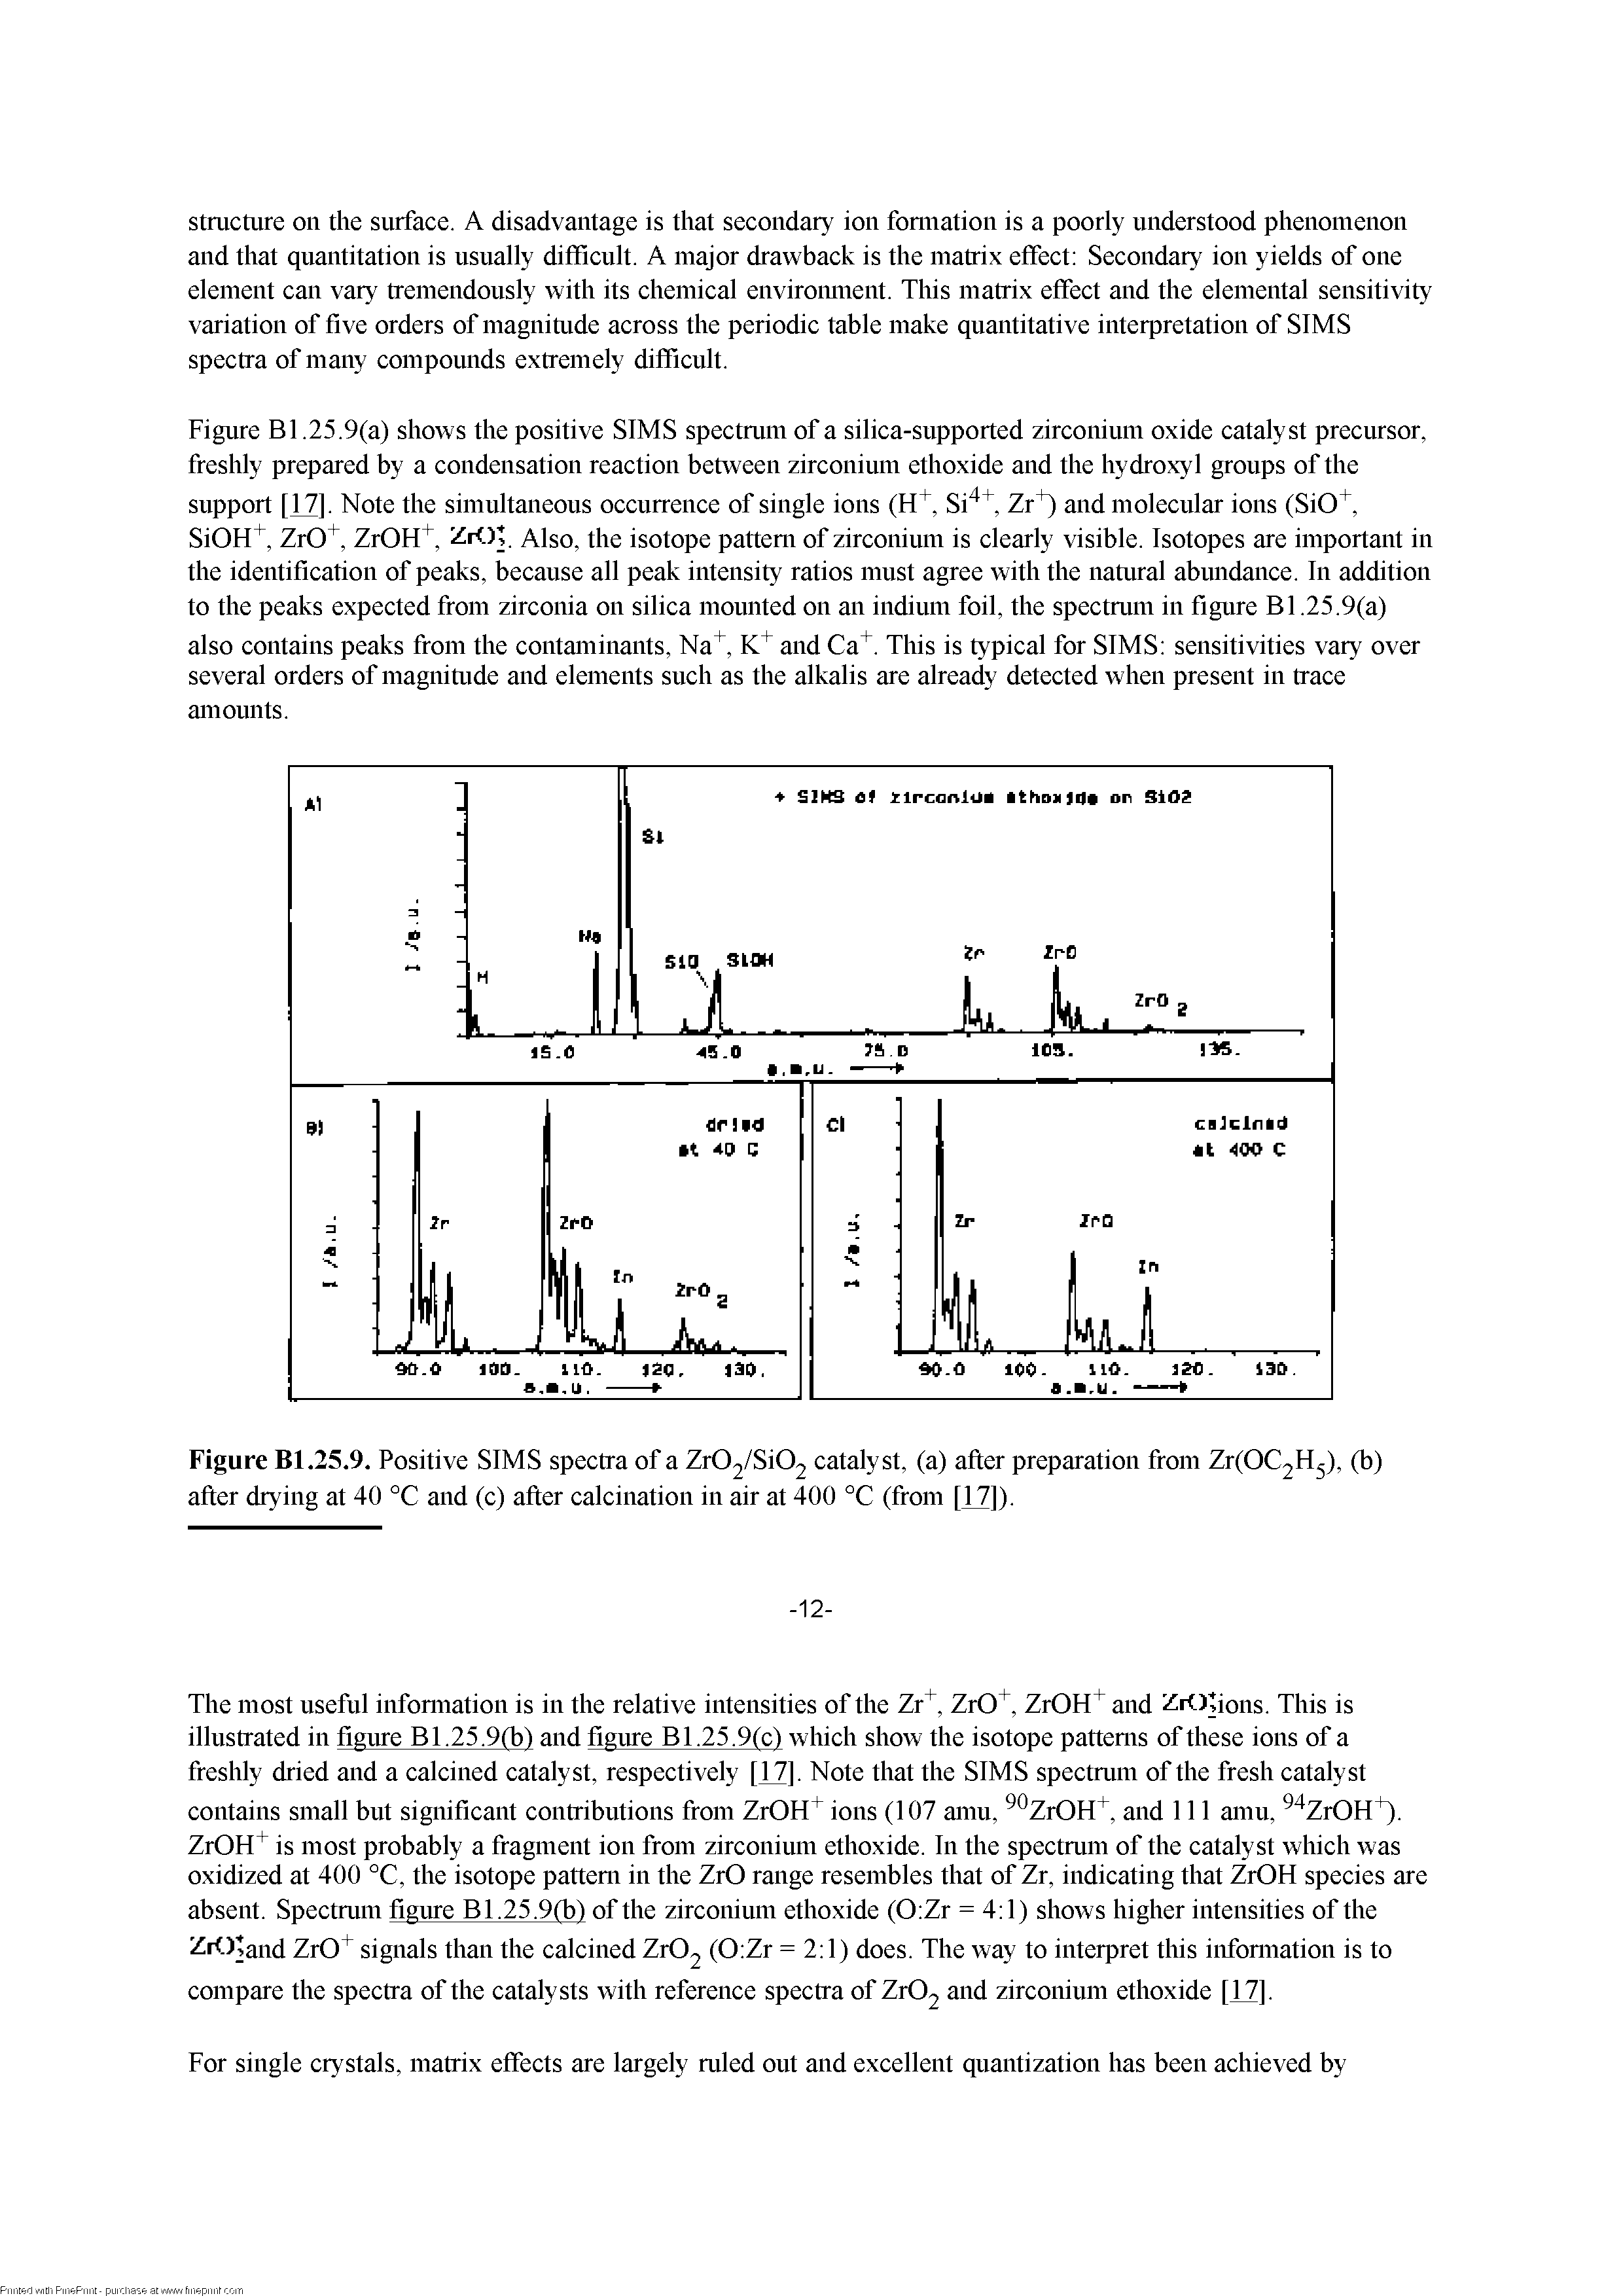 Figure Bl.25.9(a) shows the positive SIMS spectrum of a silica-supported zirconium oxide catalyst precursor, freshly prepared by a condensation reaction between zirconium ethoxide and the hydroxyl groups of the support [17]. Note the simultaneous occurrence of single ions (Ff, Si, Zr and molecular ions (SiO, SiOFf, ZrO, ZrOFf, ZrtK. Also, the isotope pattern of zirconium is clearly visible. Isotopes are important in the identification of peaks, because all peak intensity ratios must agree with the natural abundance. In addition to the peaks expected from zirconia on silica mounted on an indium foil, the spectrum in figure Bl. 25.9(a)...